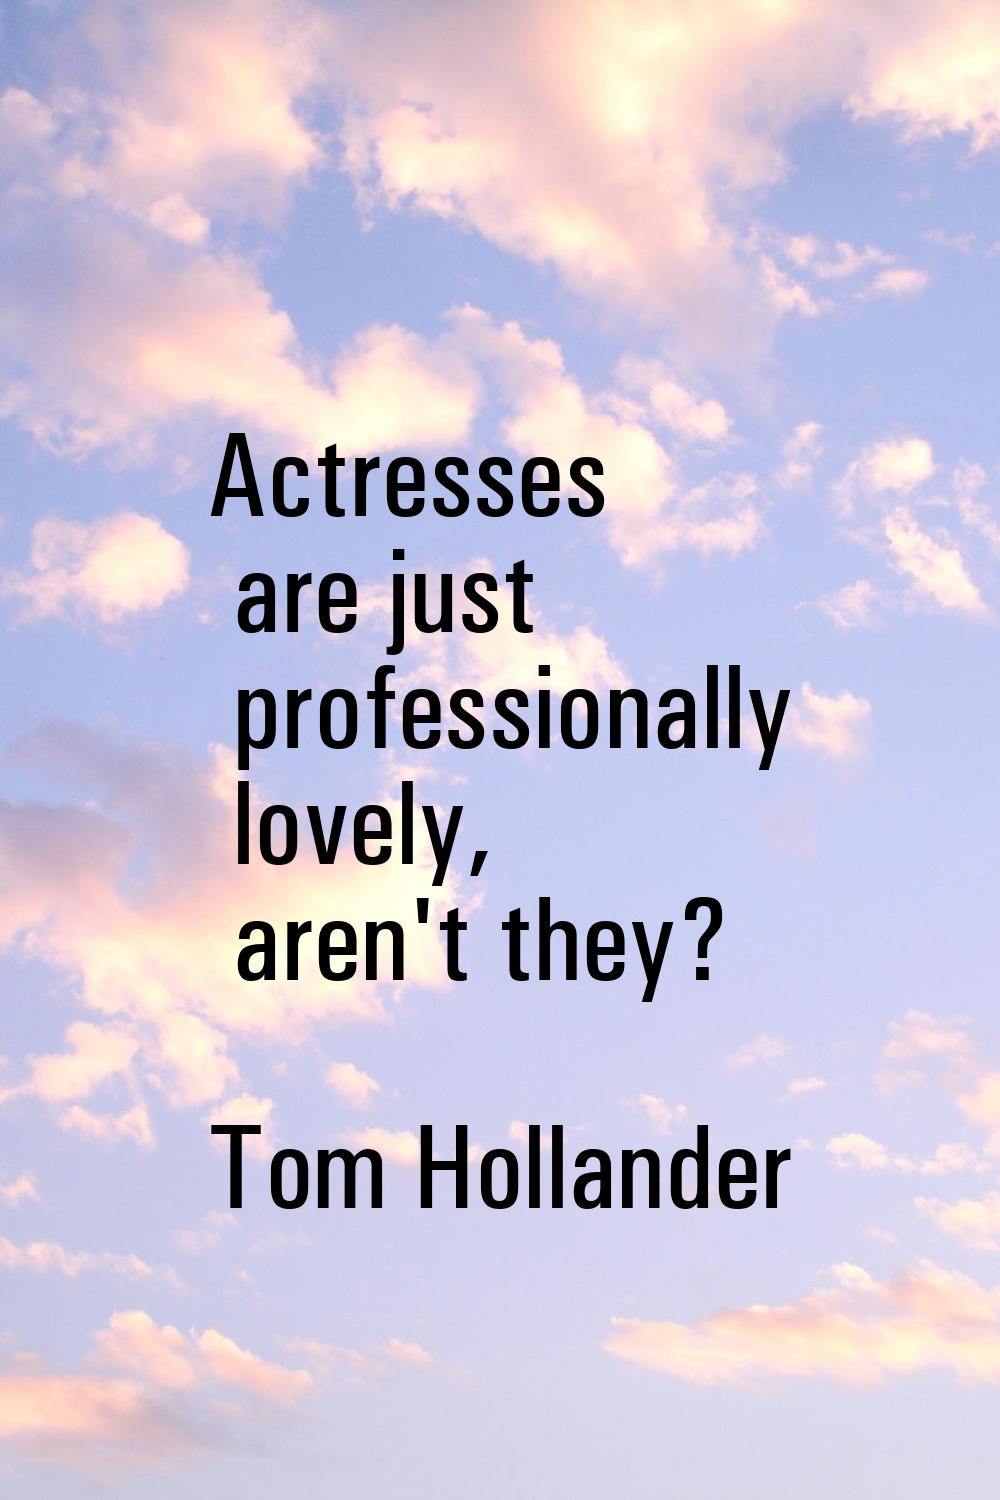 Actresses are just professionally lovely, aren't they?